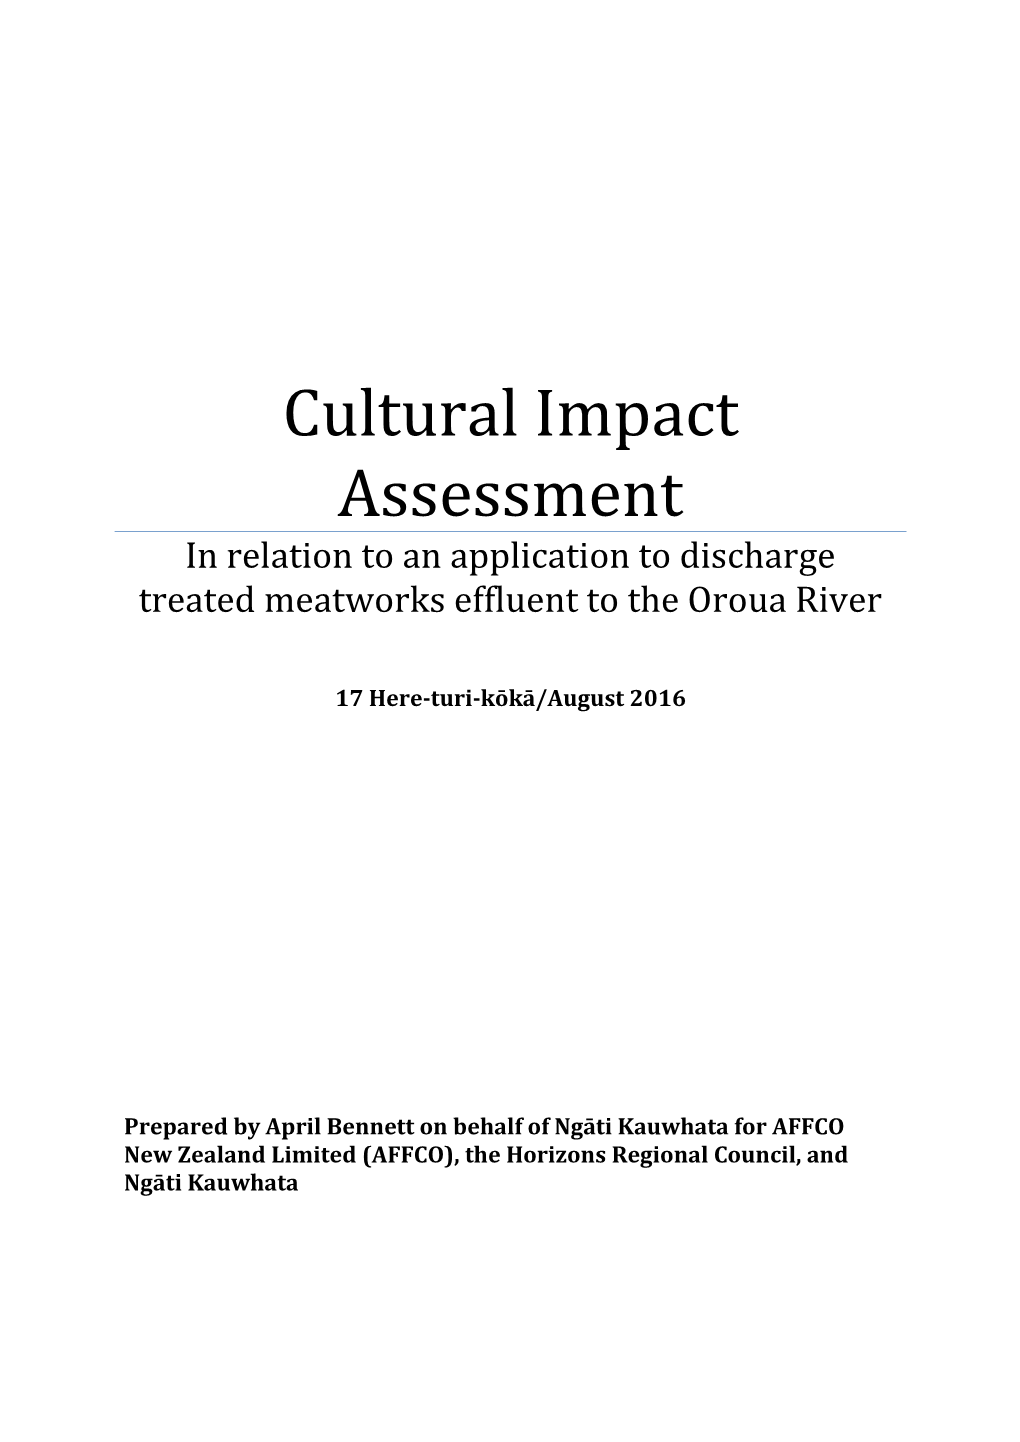 Cultural Impact Assessment in Relation to an Application to Discharge Treated Meatworks Effluent to the Oroua River